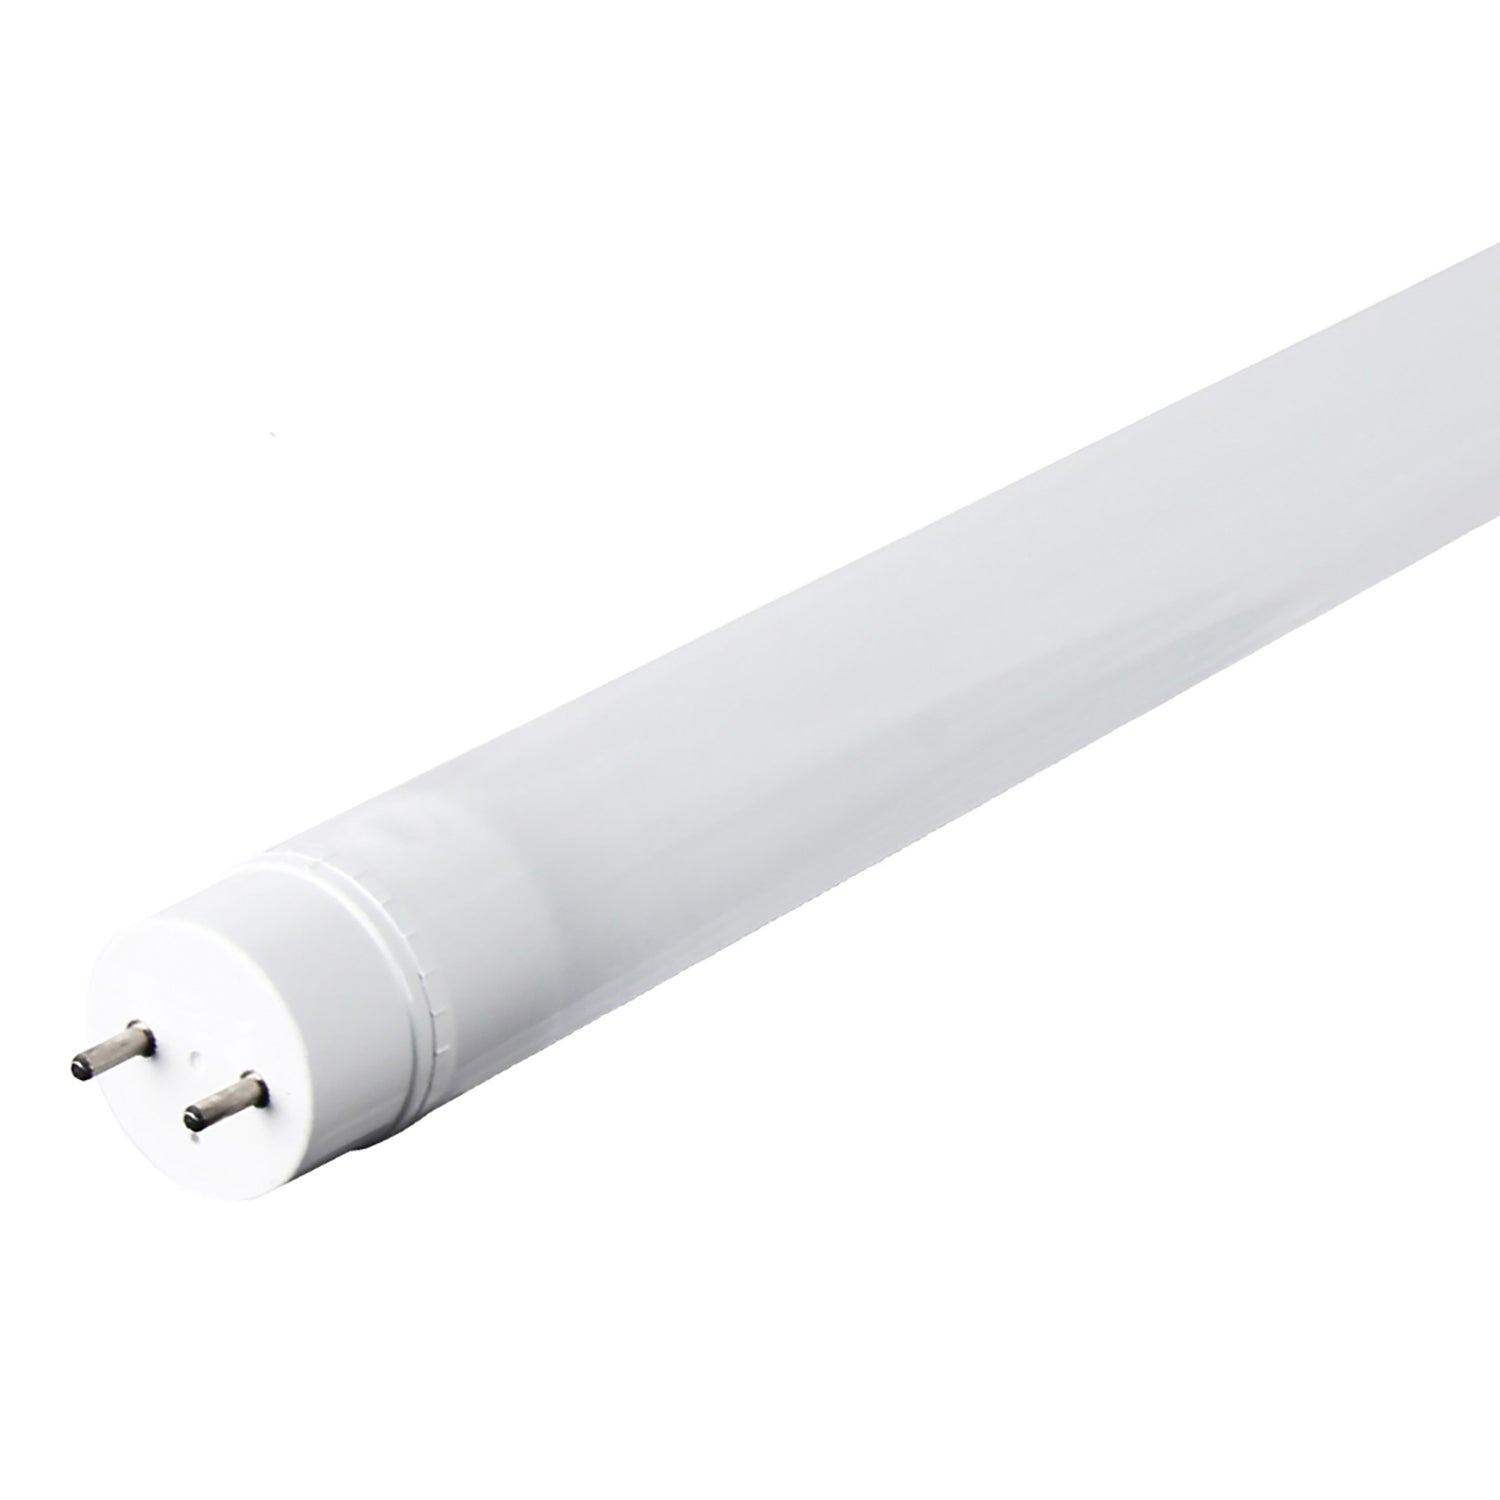 4 ft. 14W Cool White (4100K) G13 Base Direct Replacement (Type A) (T8 Replacement) LED Tube